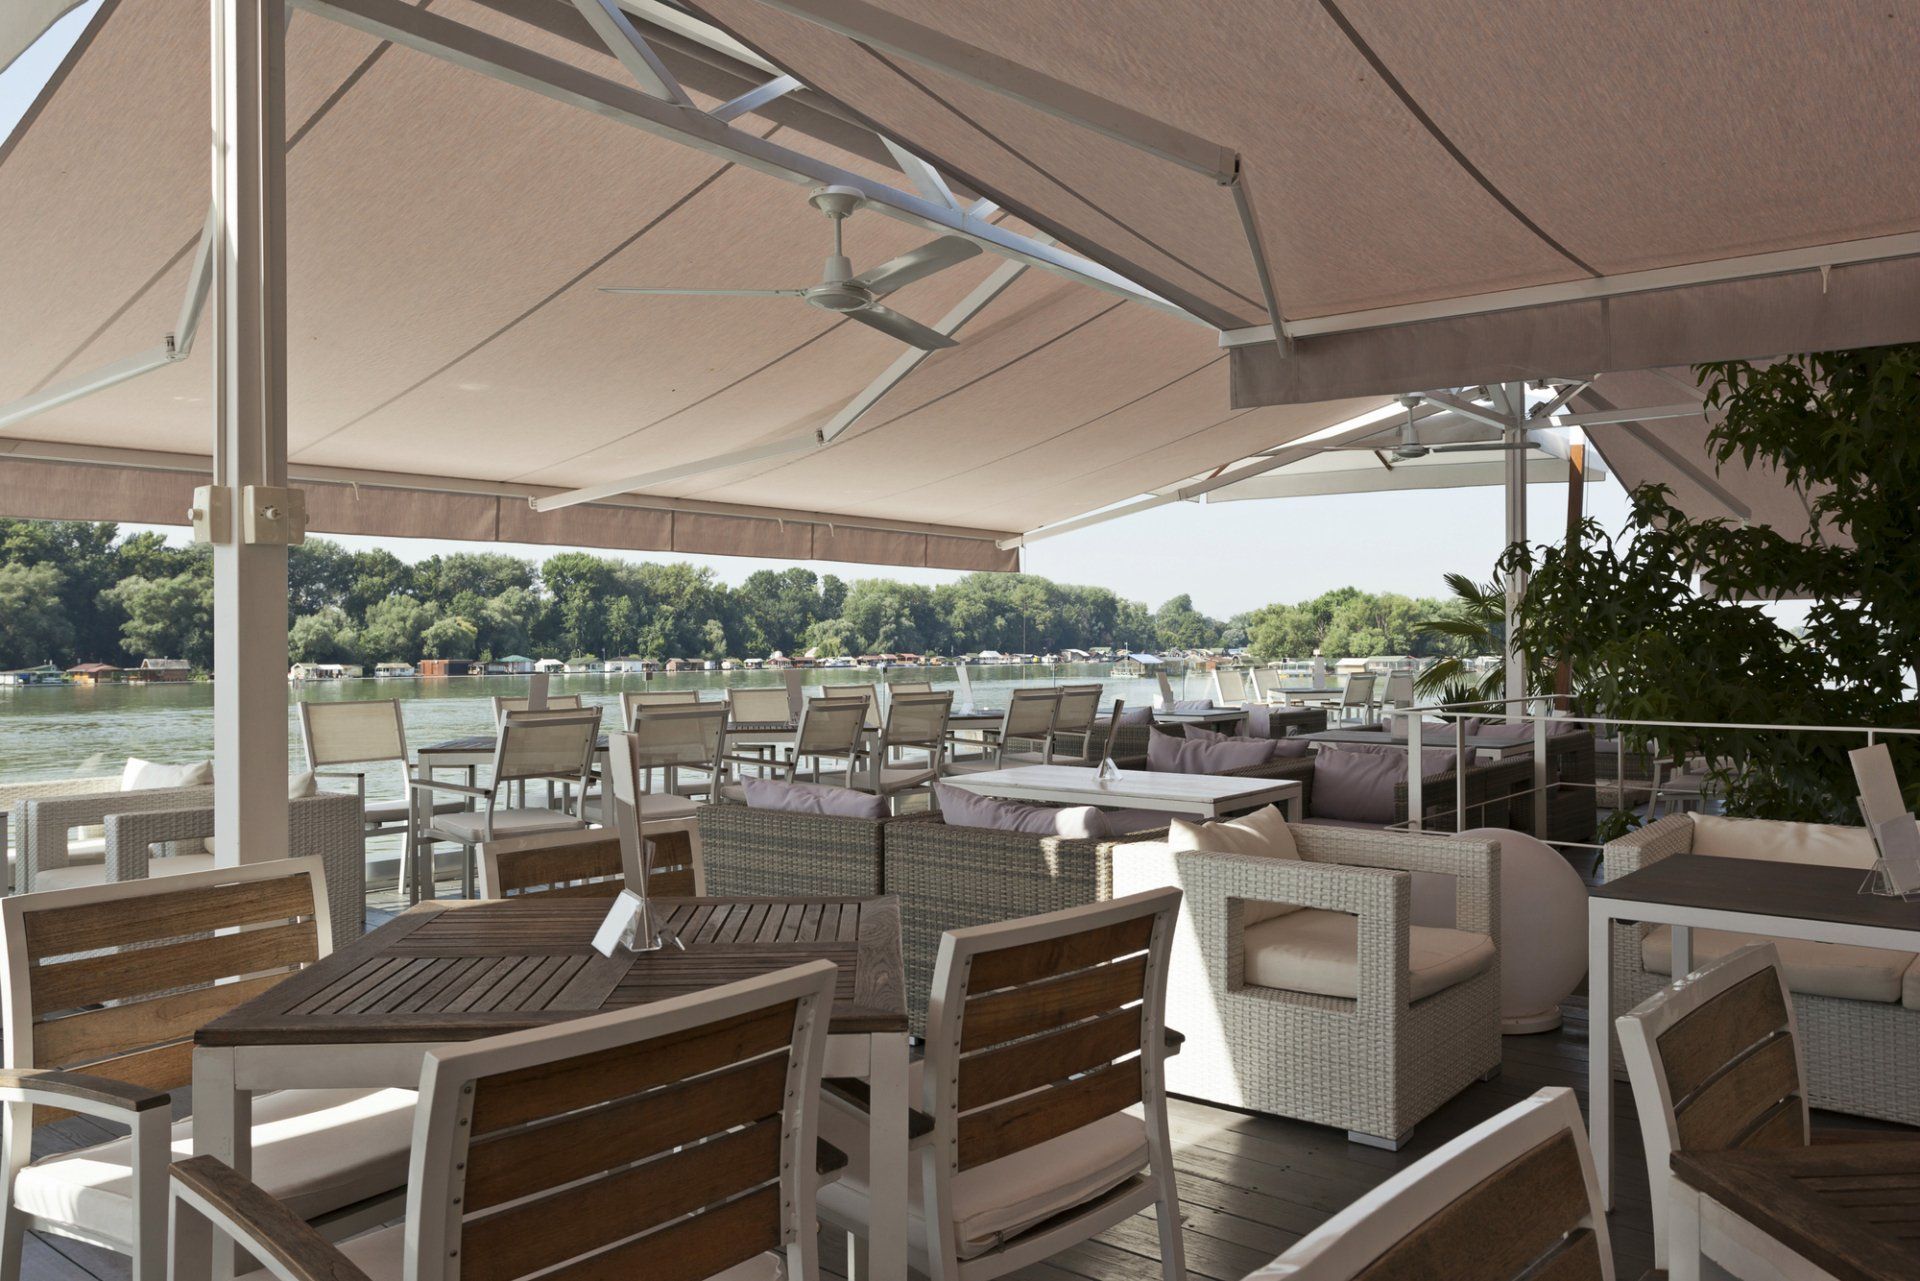 Outdoor awning extending out over outdoor commercial dining area with timber tables and chairs.